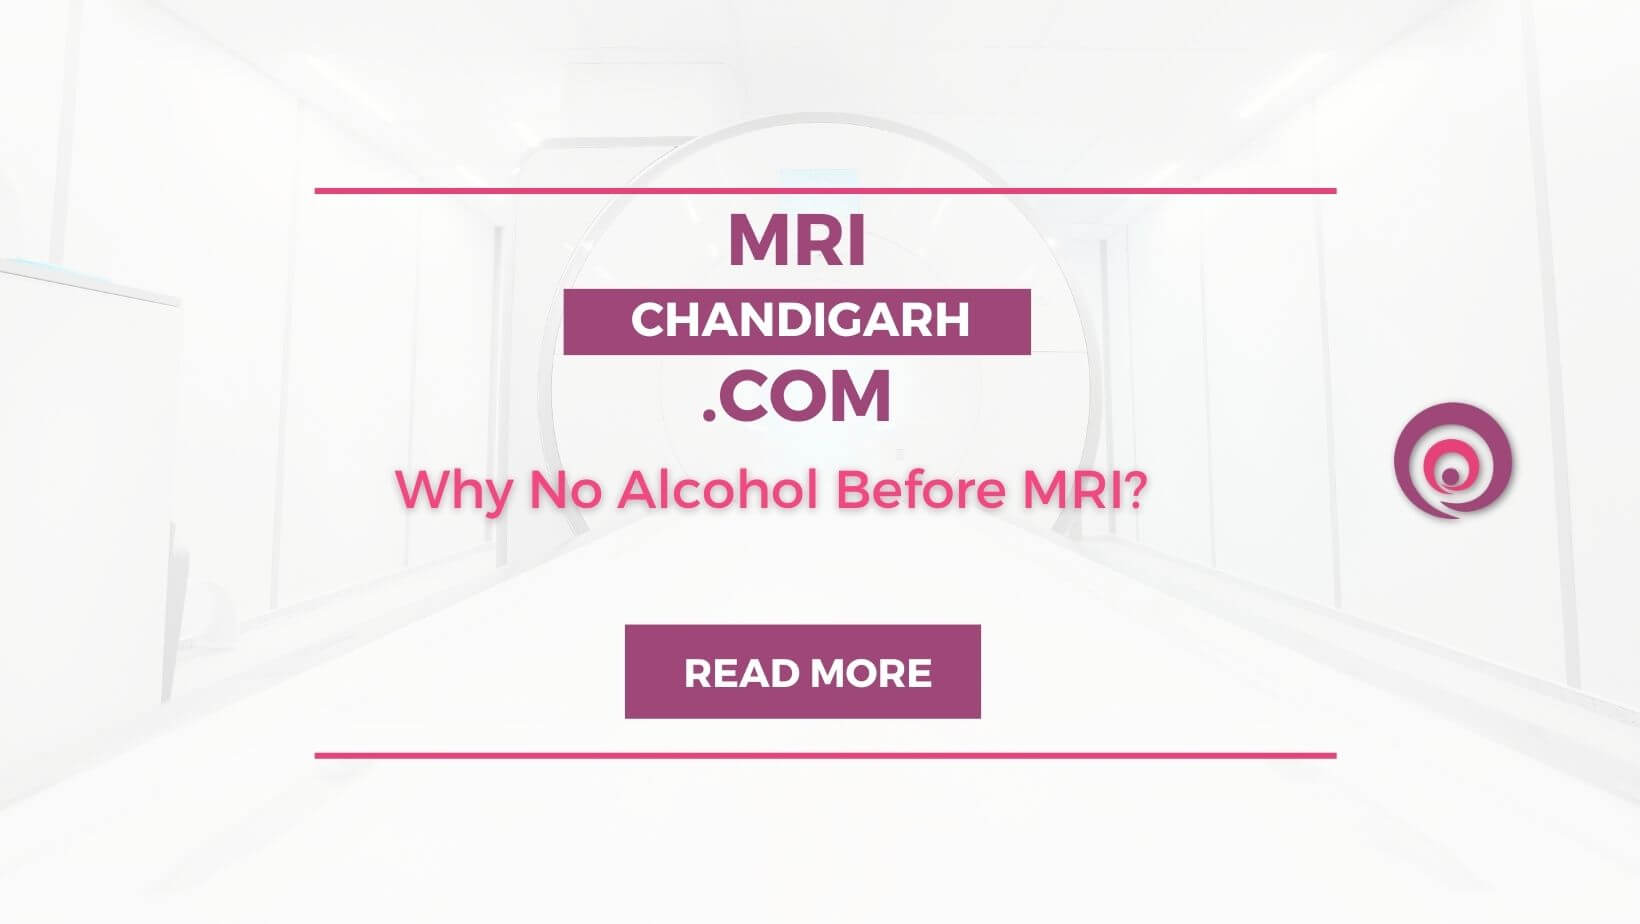 Why No Alcohol Before MRI?